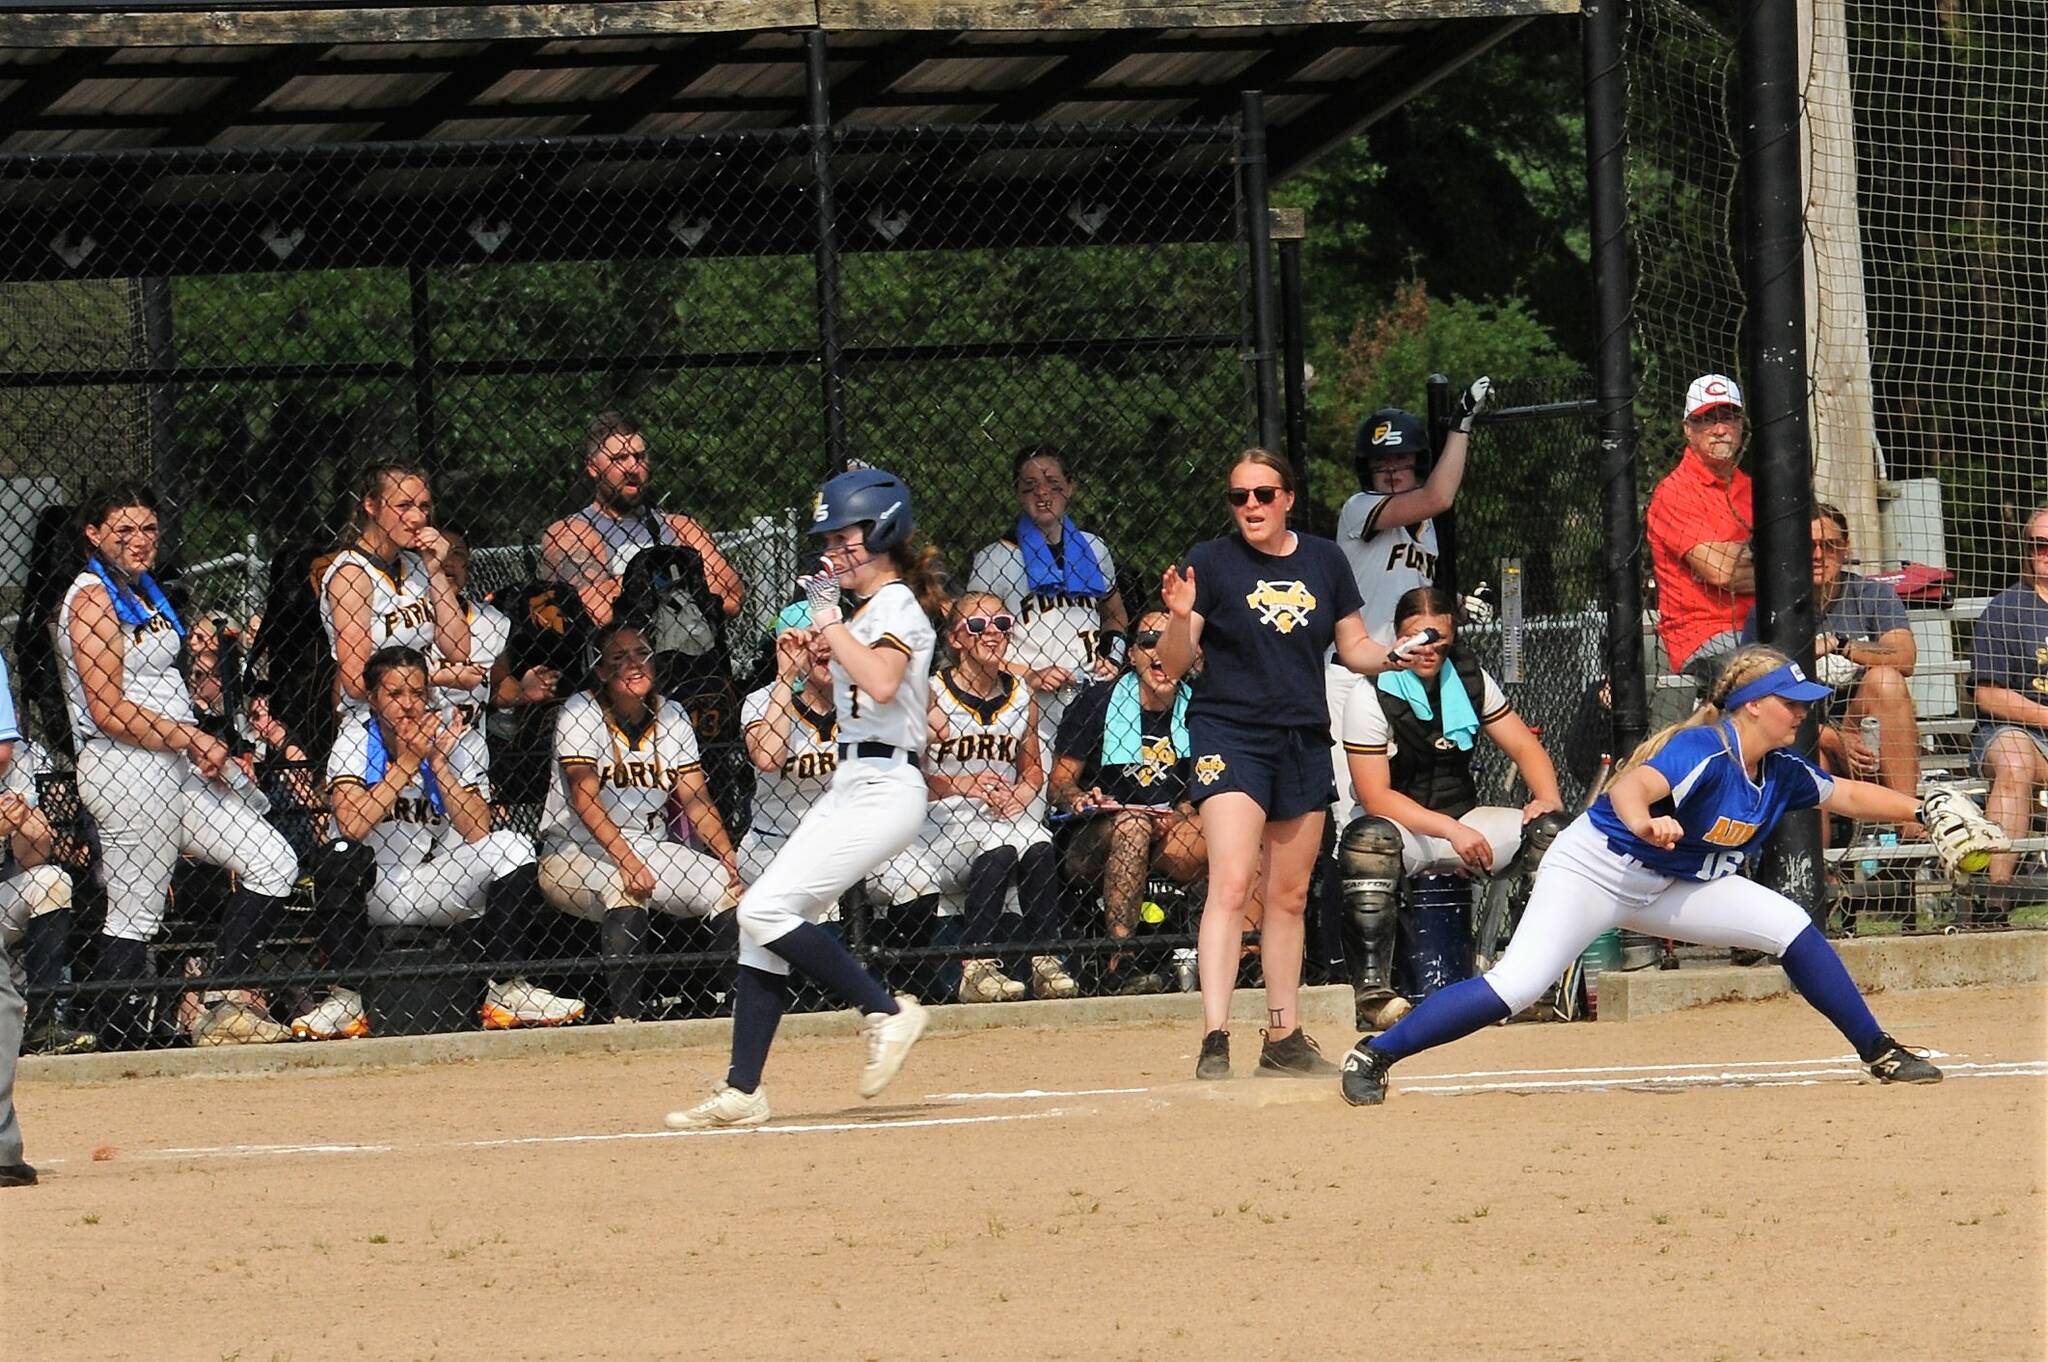 Spartan Bailey Johnson beats the throw to first during the Adna game won by Adna 9 to 1.